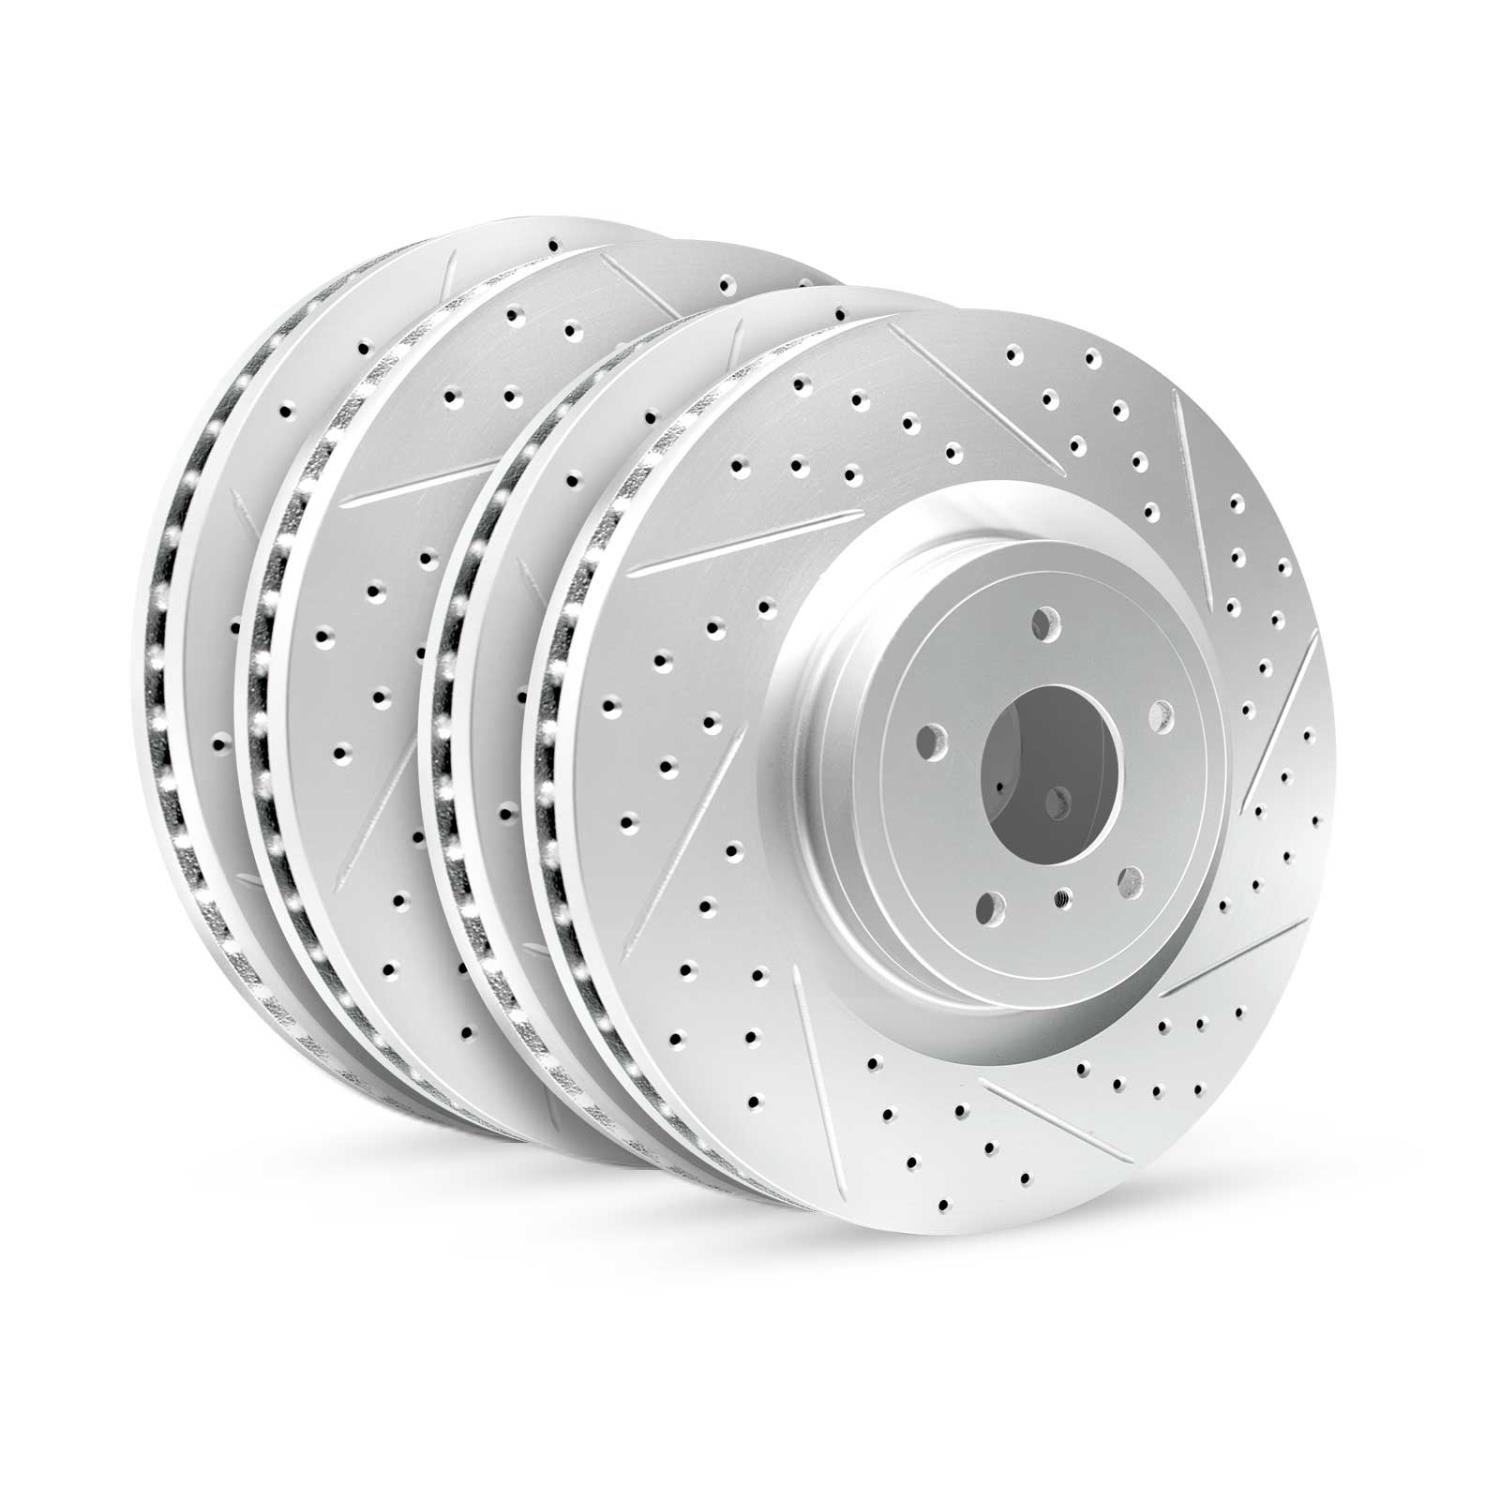 GEO-Carbon Drilled/Slotted Rotors, 1990-1993 Ford/Mazda,